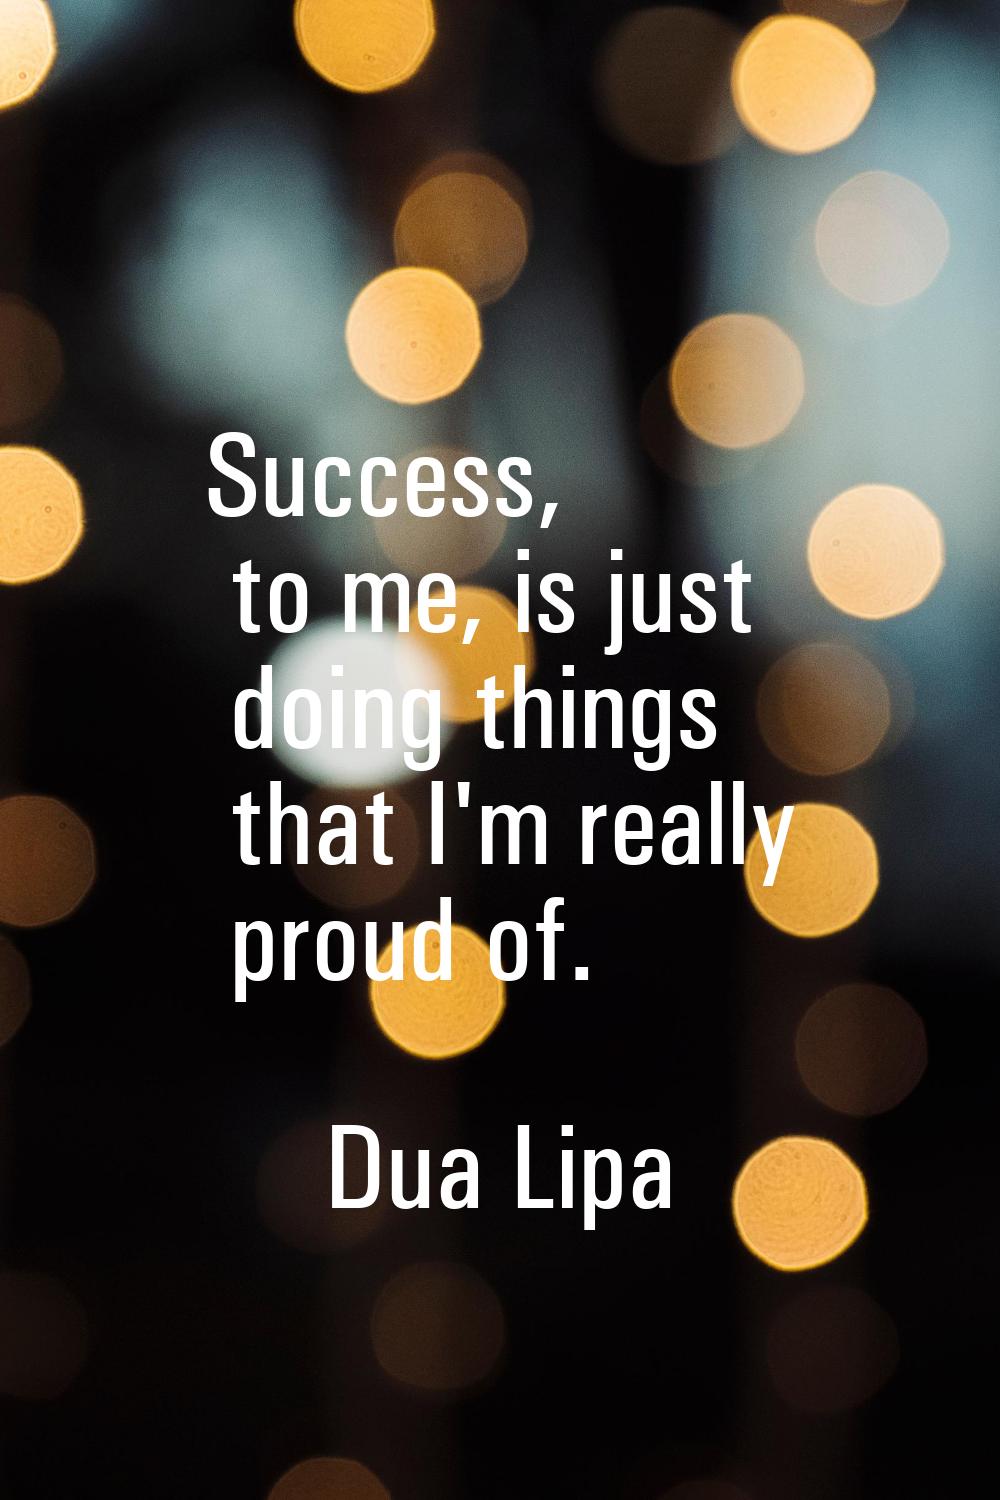 Success, to me, is just doing things that I'm really proud of.